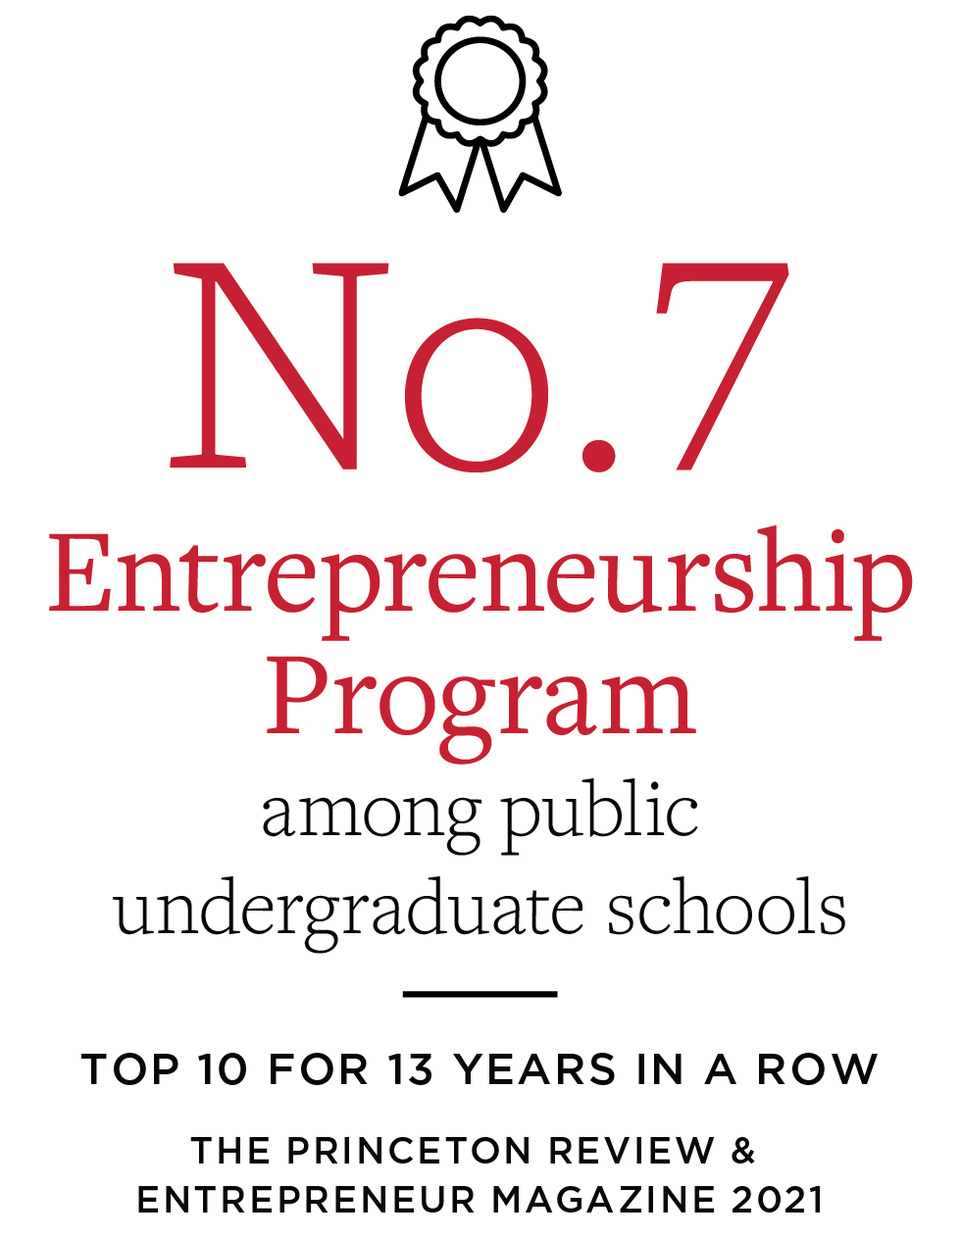 Entrepreneurship ranked No. 5 among public institutions by Princeton Review